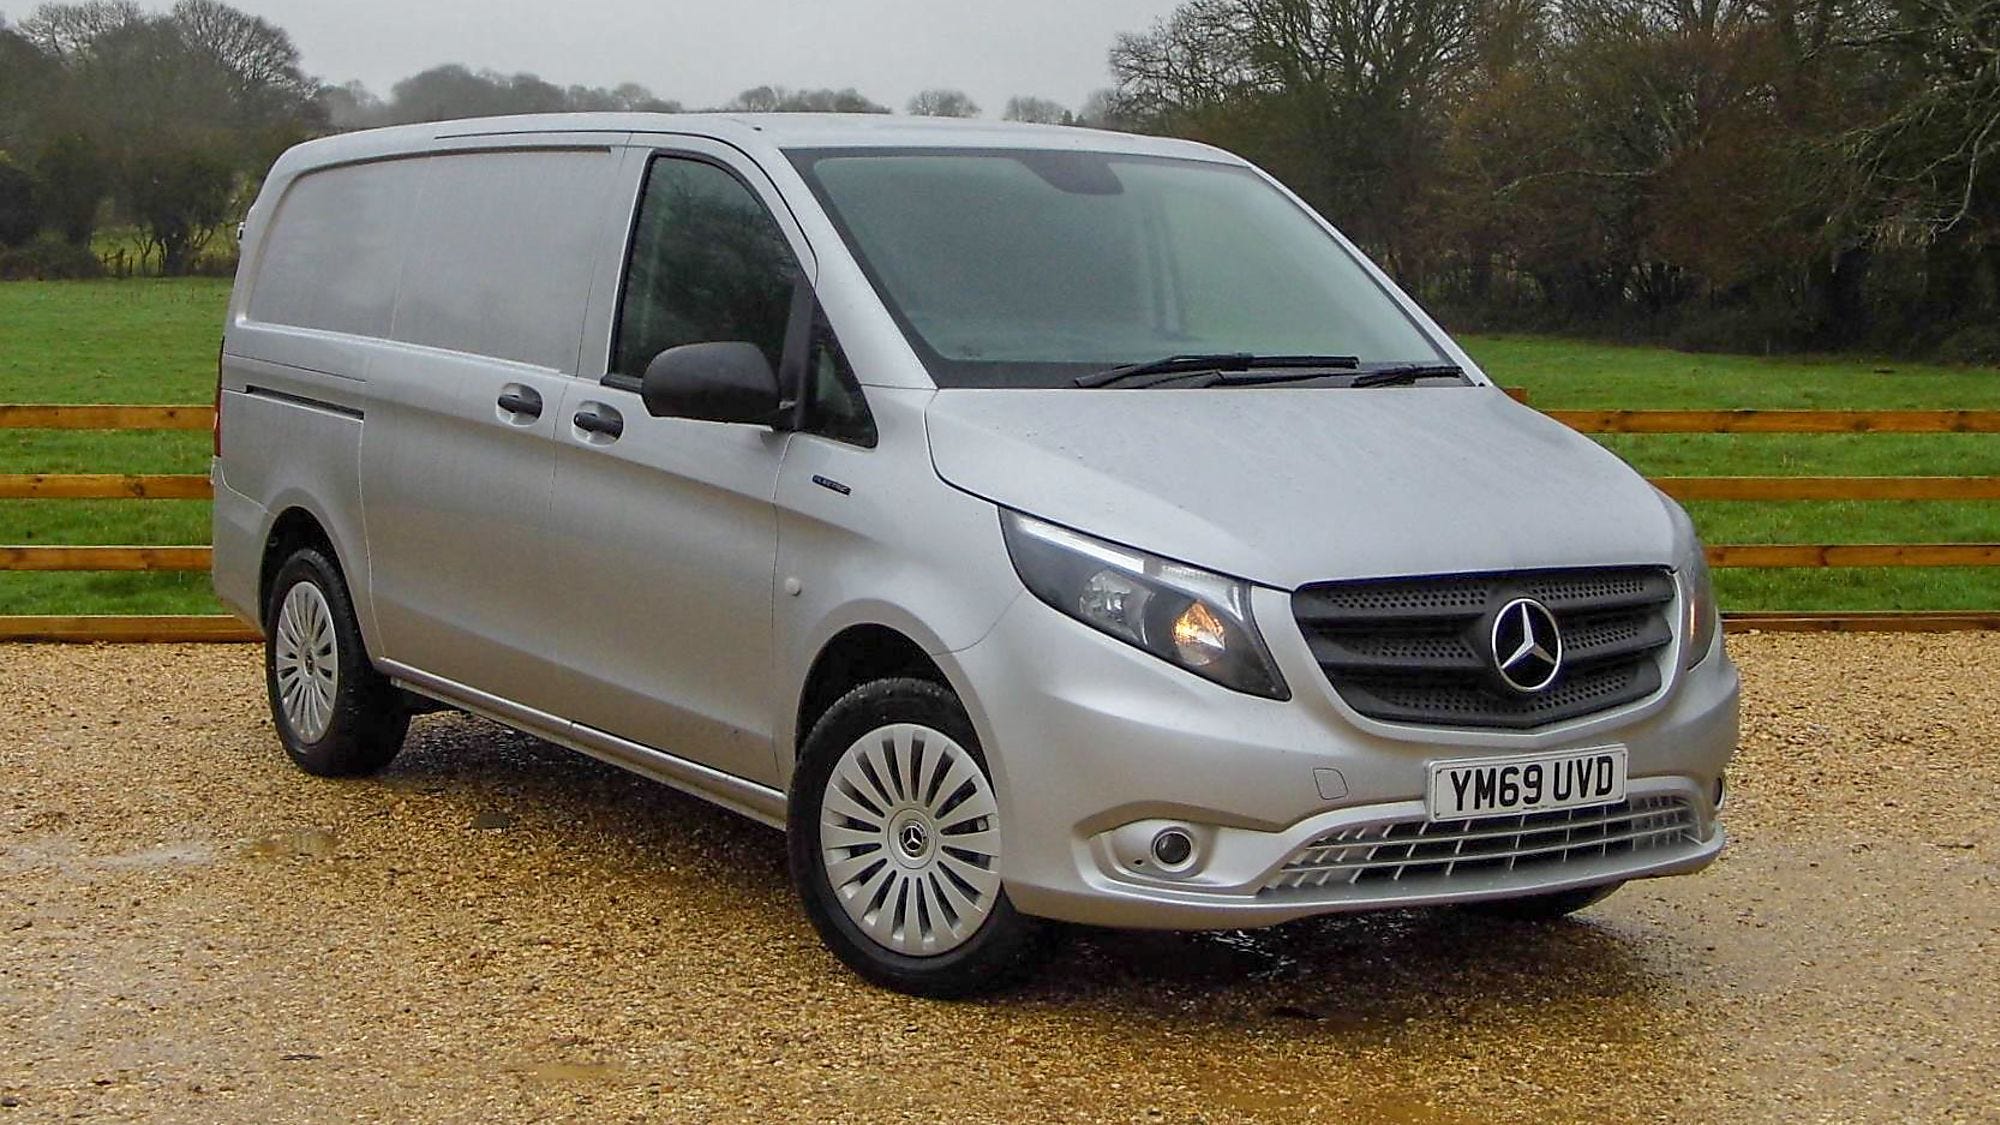 Mercedes-Benz Vito [W447] (2015 - 2020) used car review